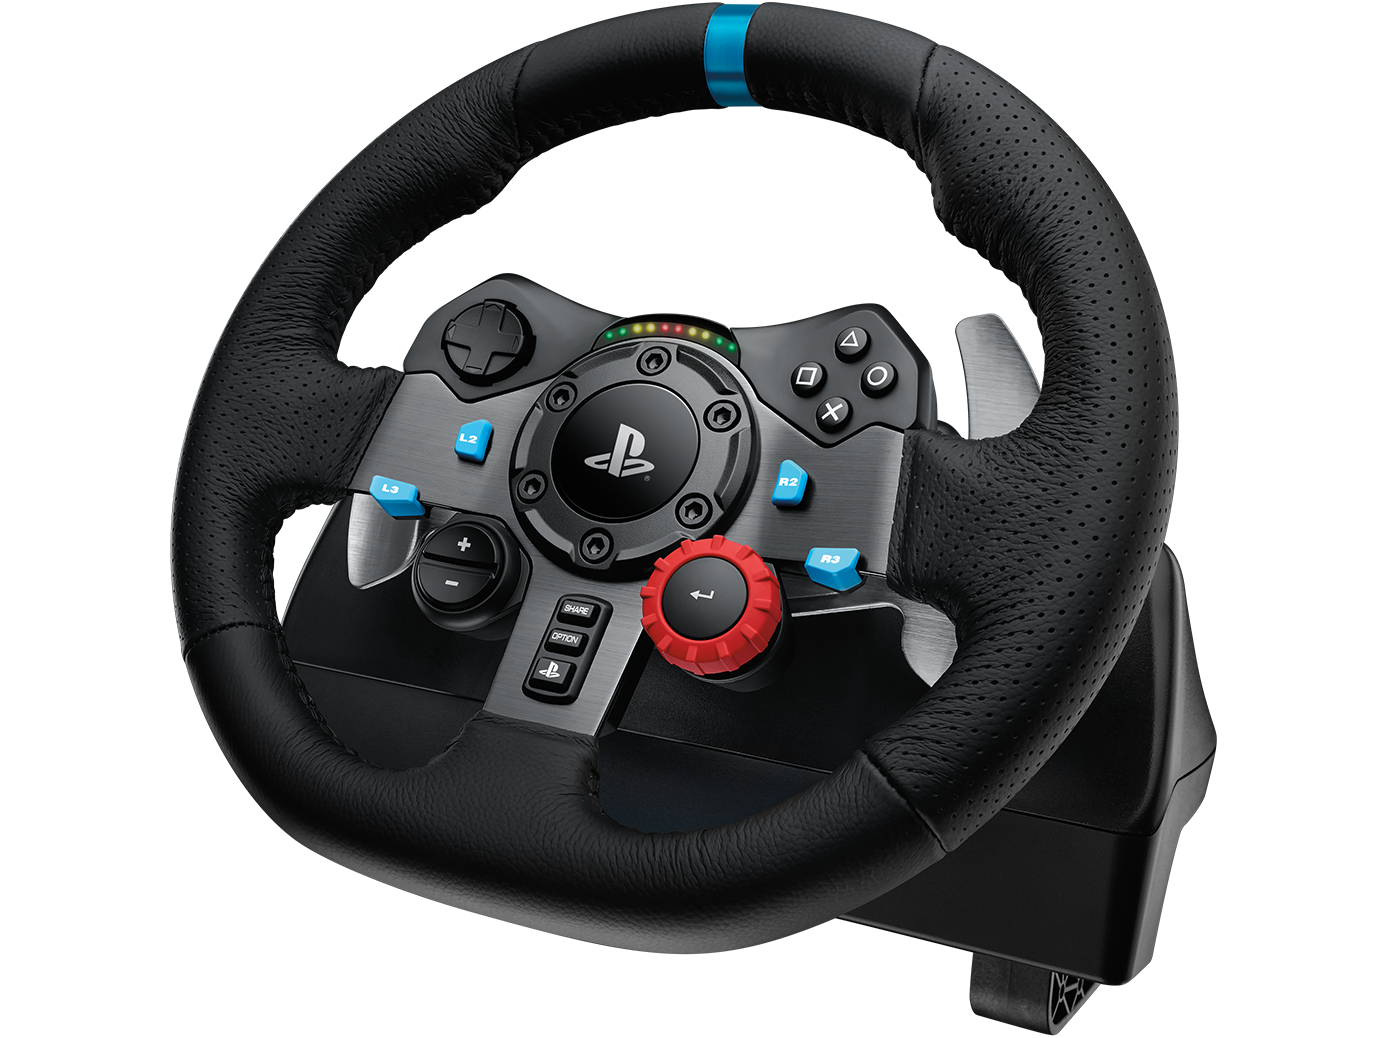 Logitech G29 Driving Force Steering Wheels & Pedals